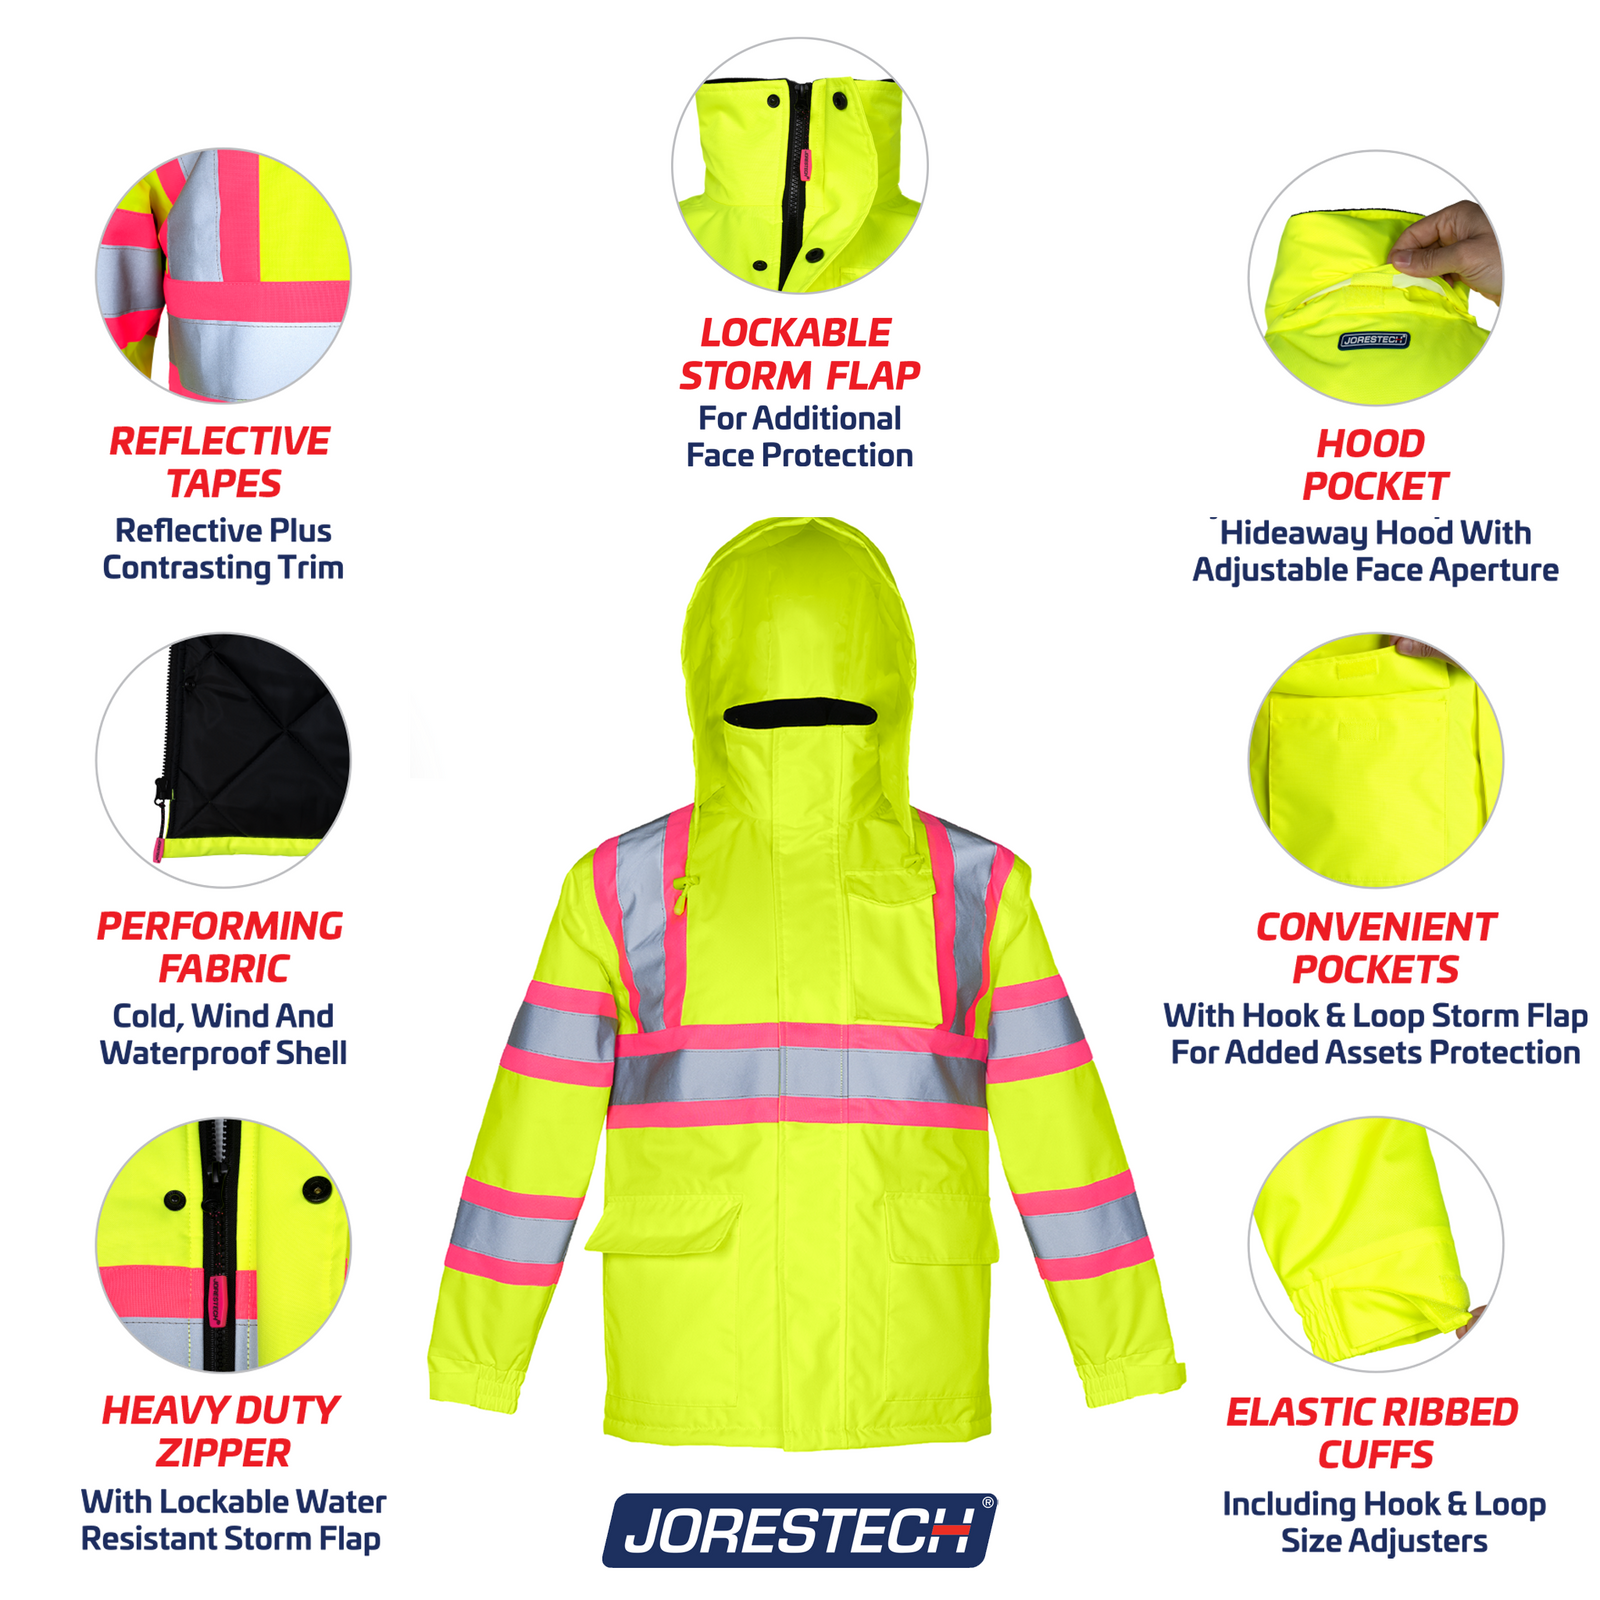 Hi vis two tone safety jacket with reflective stripes and pink contrast trim. ANSI compliant winter jacket with hideaway hoodie with performing fabric for cold, wind and waterproof protection